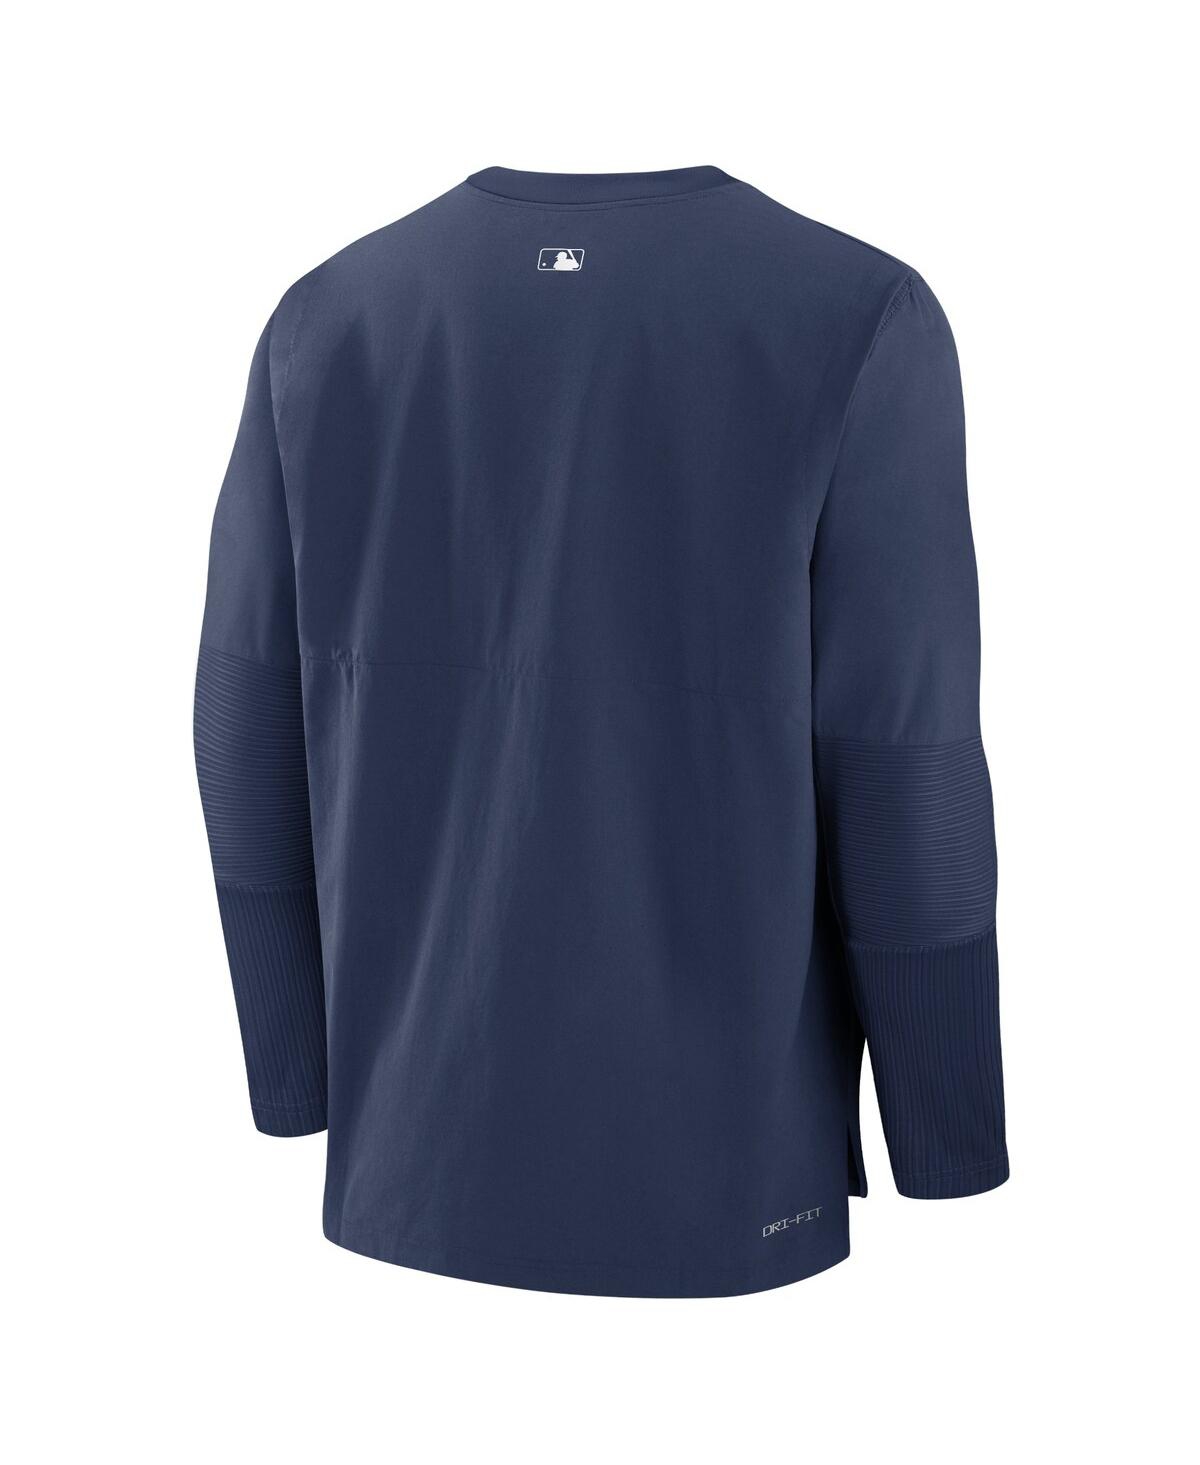 Shop Nike Men's  Navy Boston Red Sox Authentic Collection Player Performance Pullover Sweatshirt